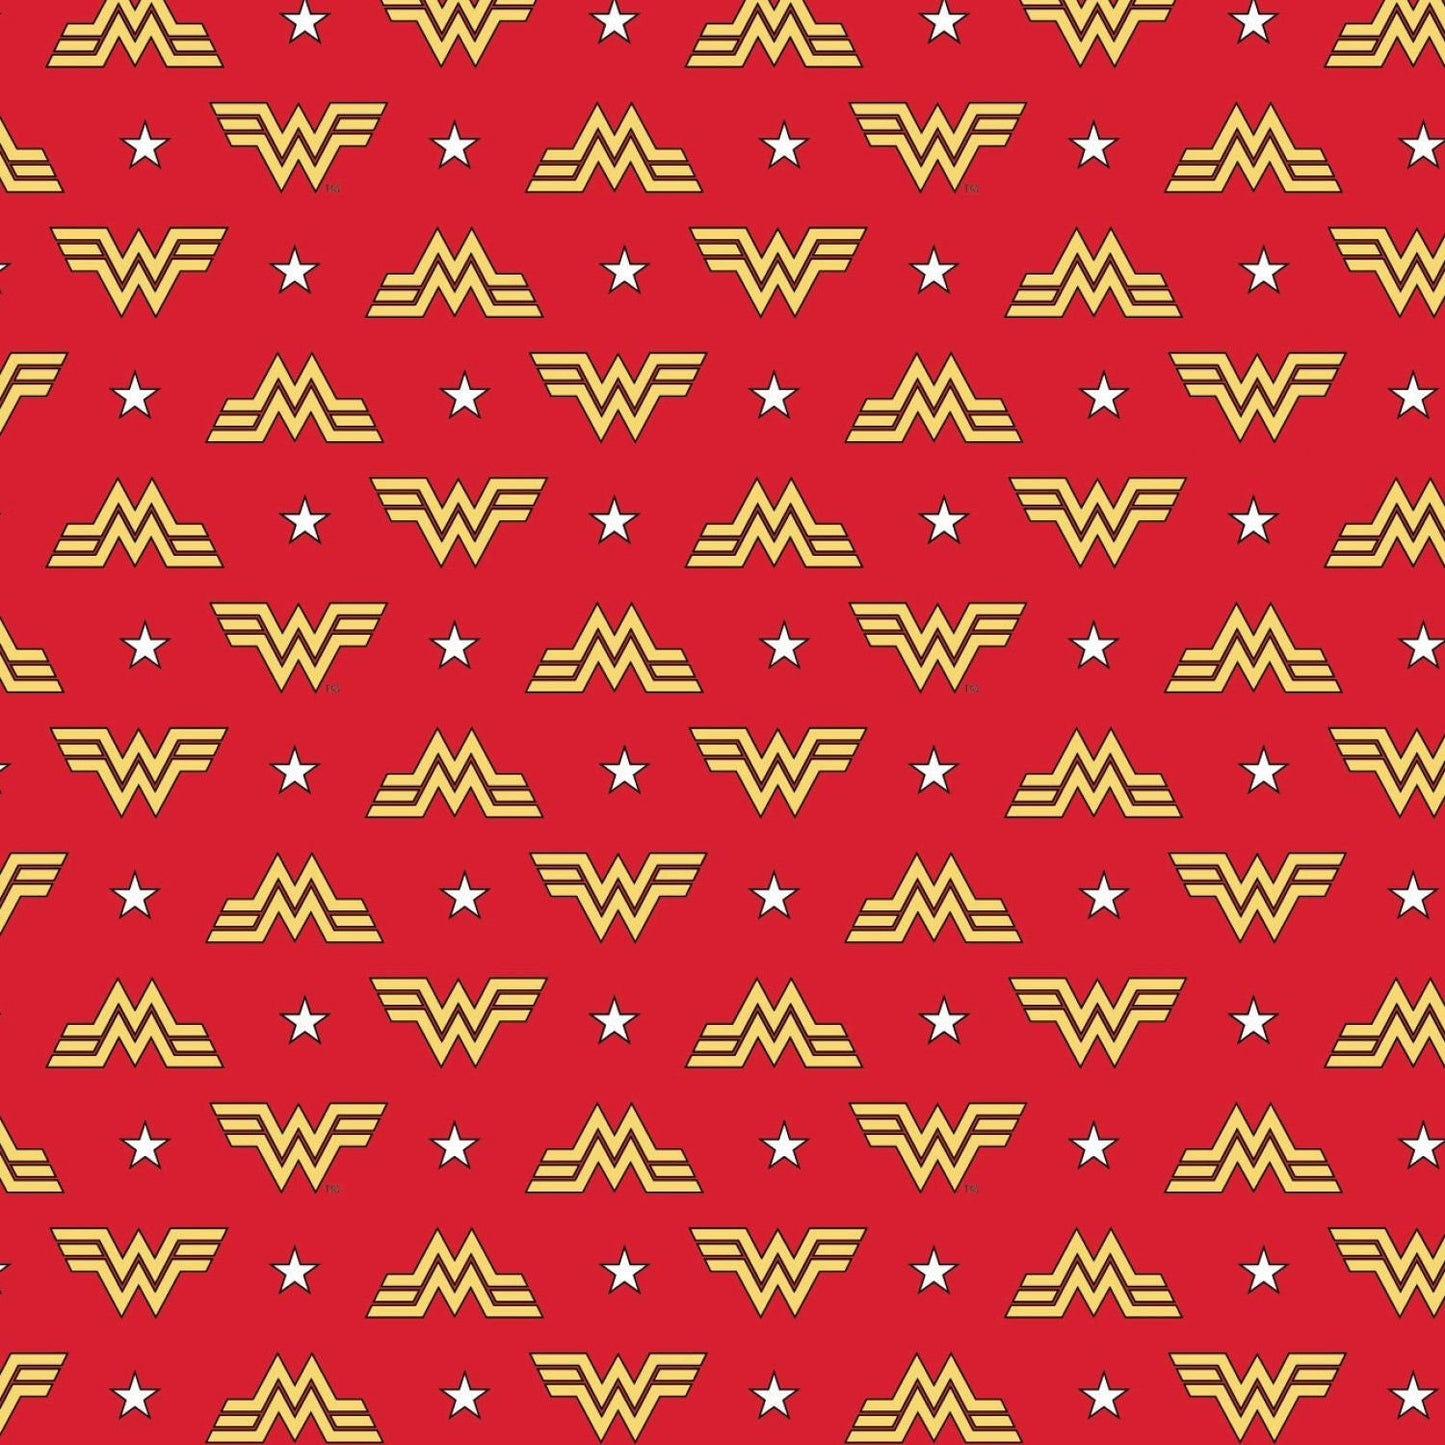 Licensed Wonder Woman 1984 Logo & Stars Red 23400825-1 Cotton Woven Fabric